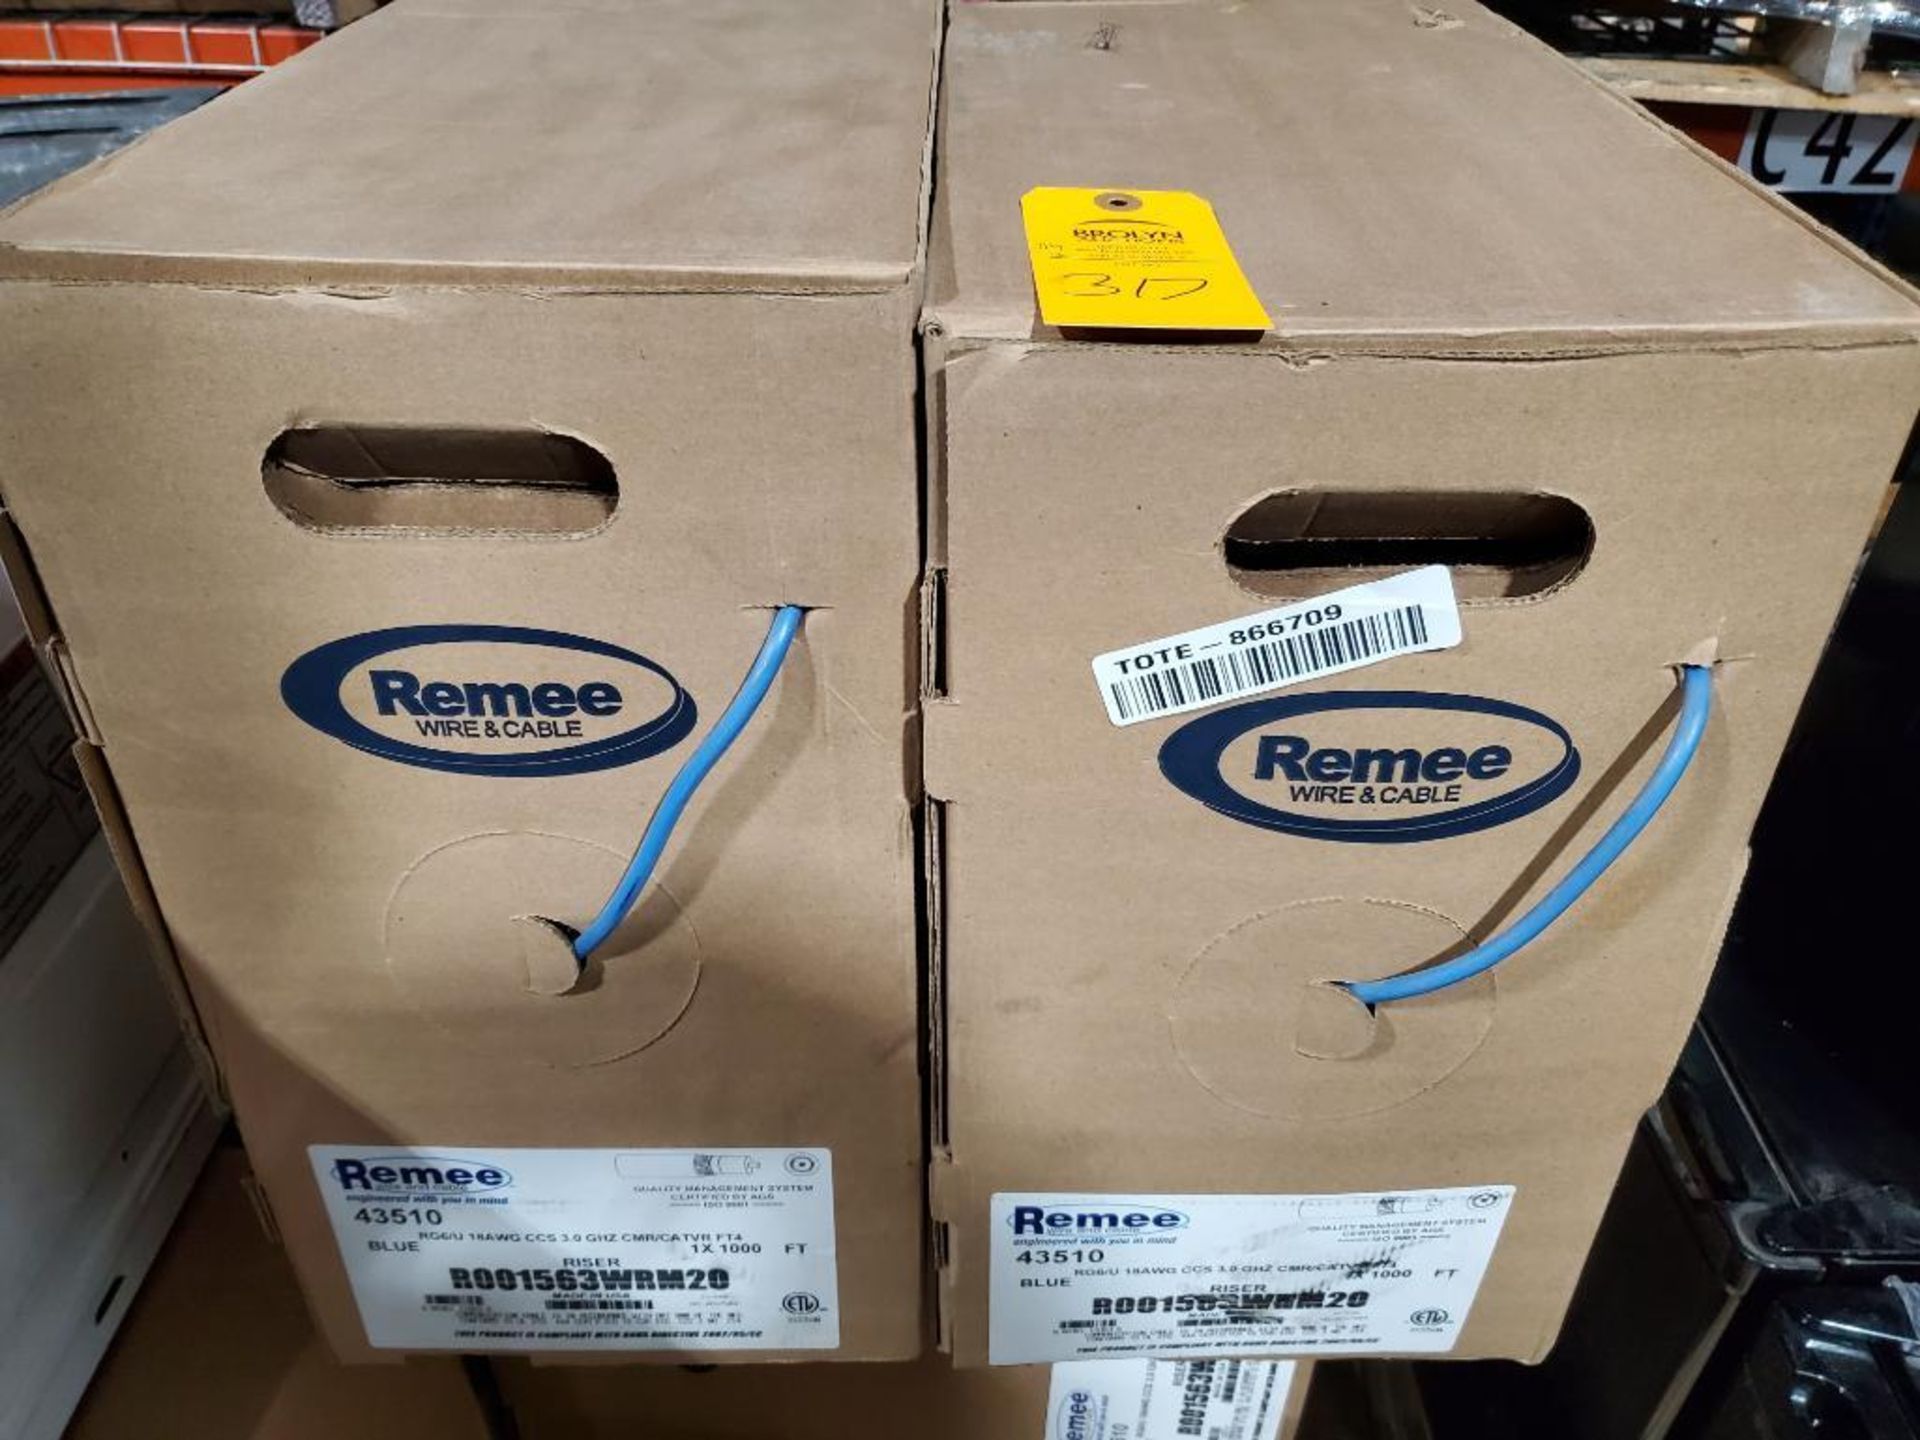 Qty 2 - Boxes of Remee wire and cable coaxial.